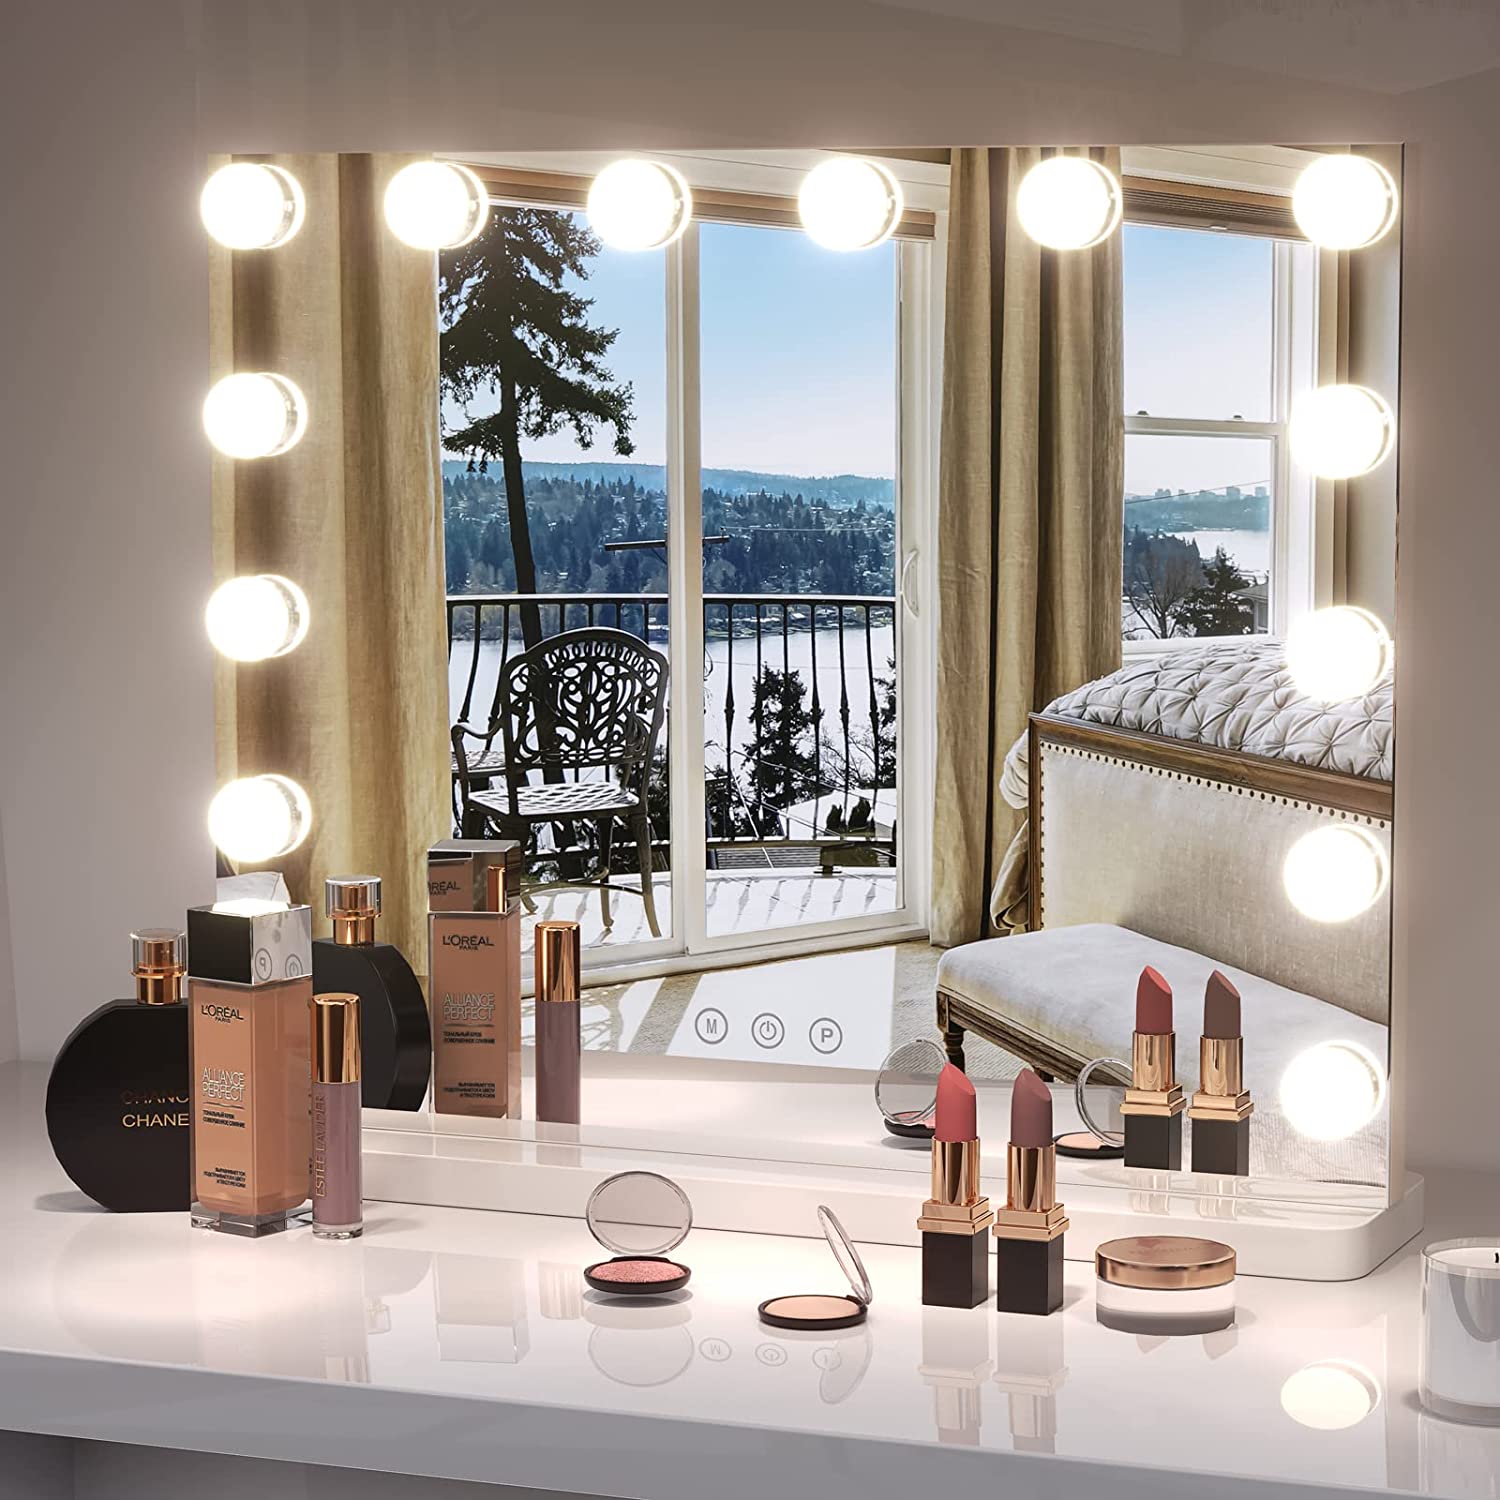 LUXFURNI Vanity Tabletop Hollywood Makeup Mirror w/USB-Powered Dimmable  Light, Touch Control, 12 Day/Warm LED Light (16Wx20L, White)